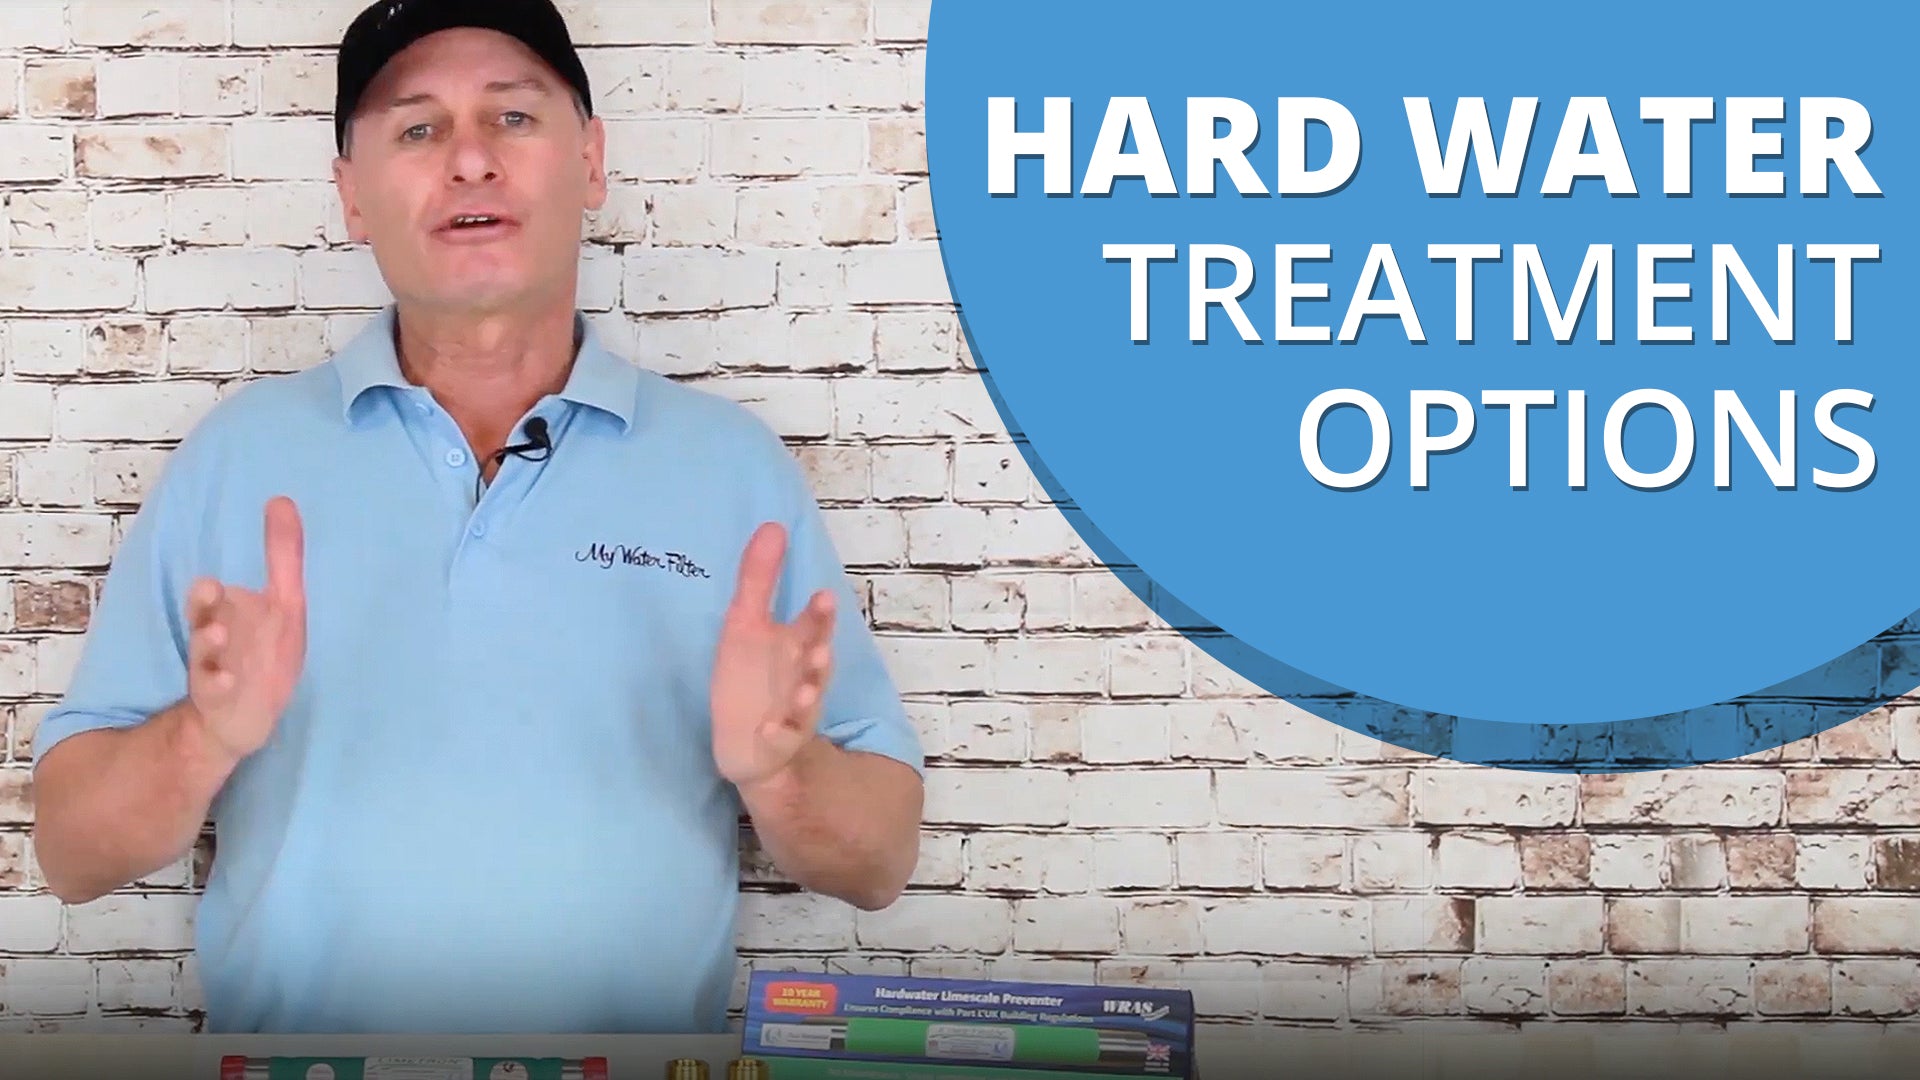 [VIDEO] What are the different options available to treat hard water